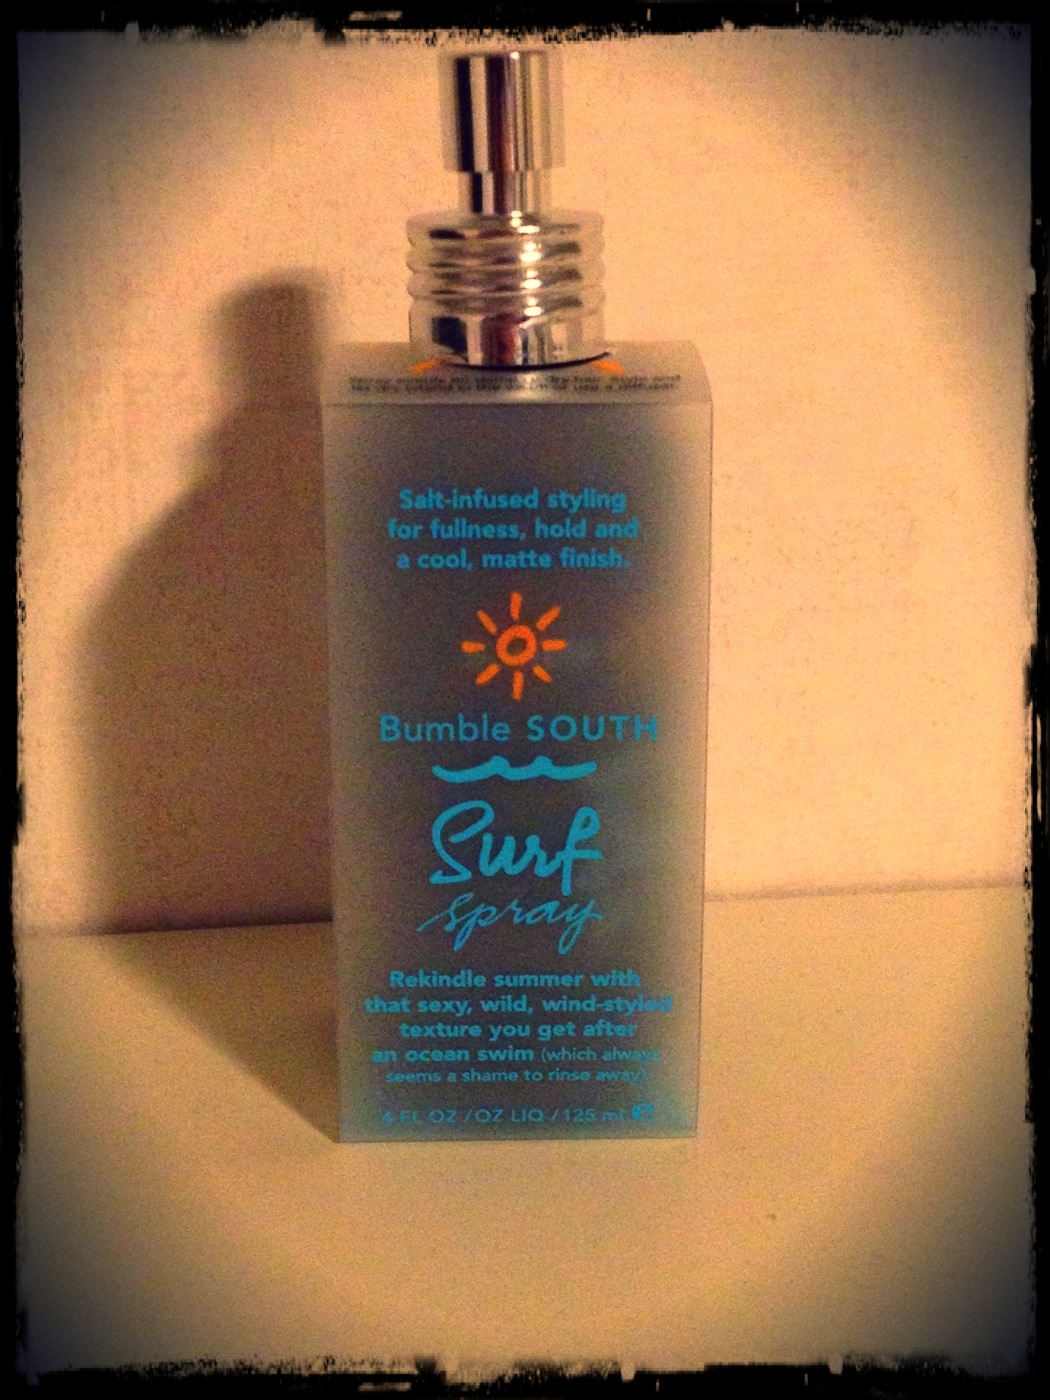 Bumble and Bumble Surf Spray/ Pic by kiwikoo